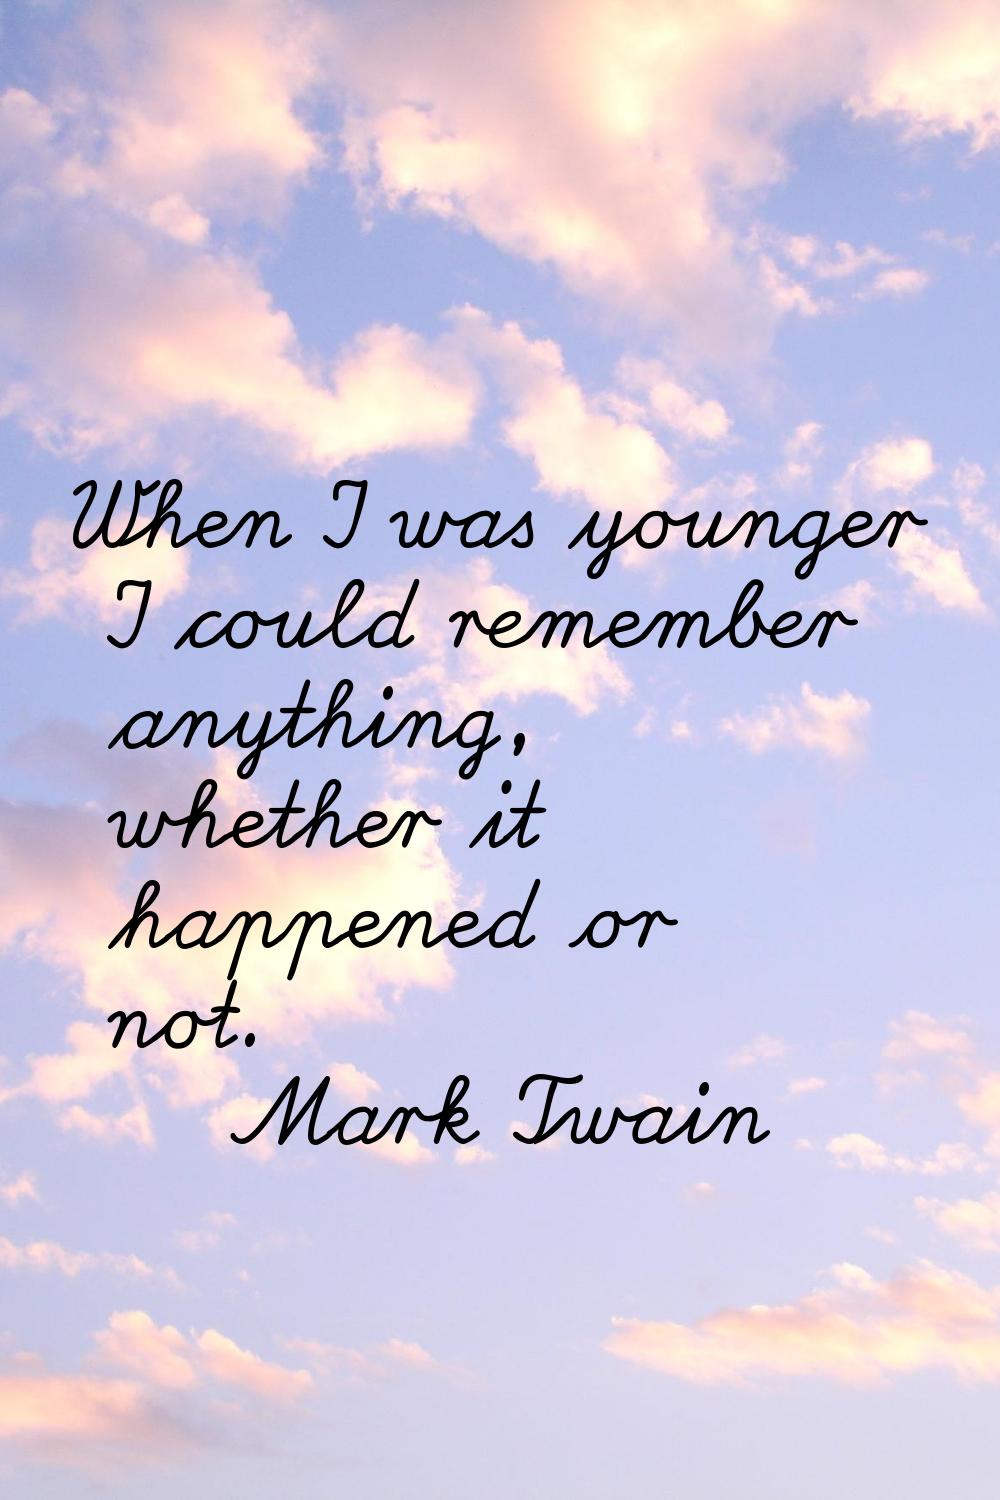 When I was younger I could remember anything, whether it happened or not.